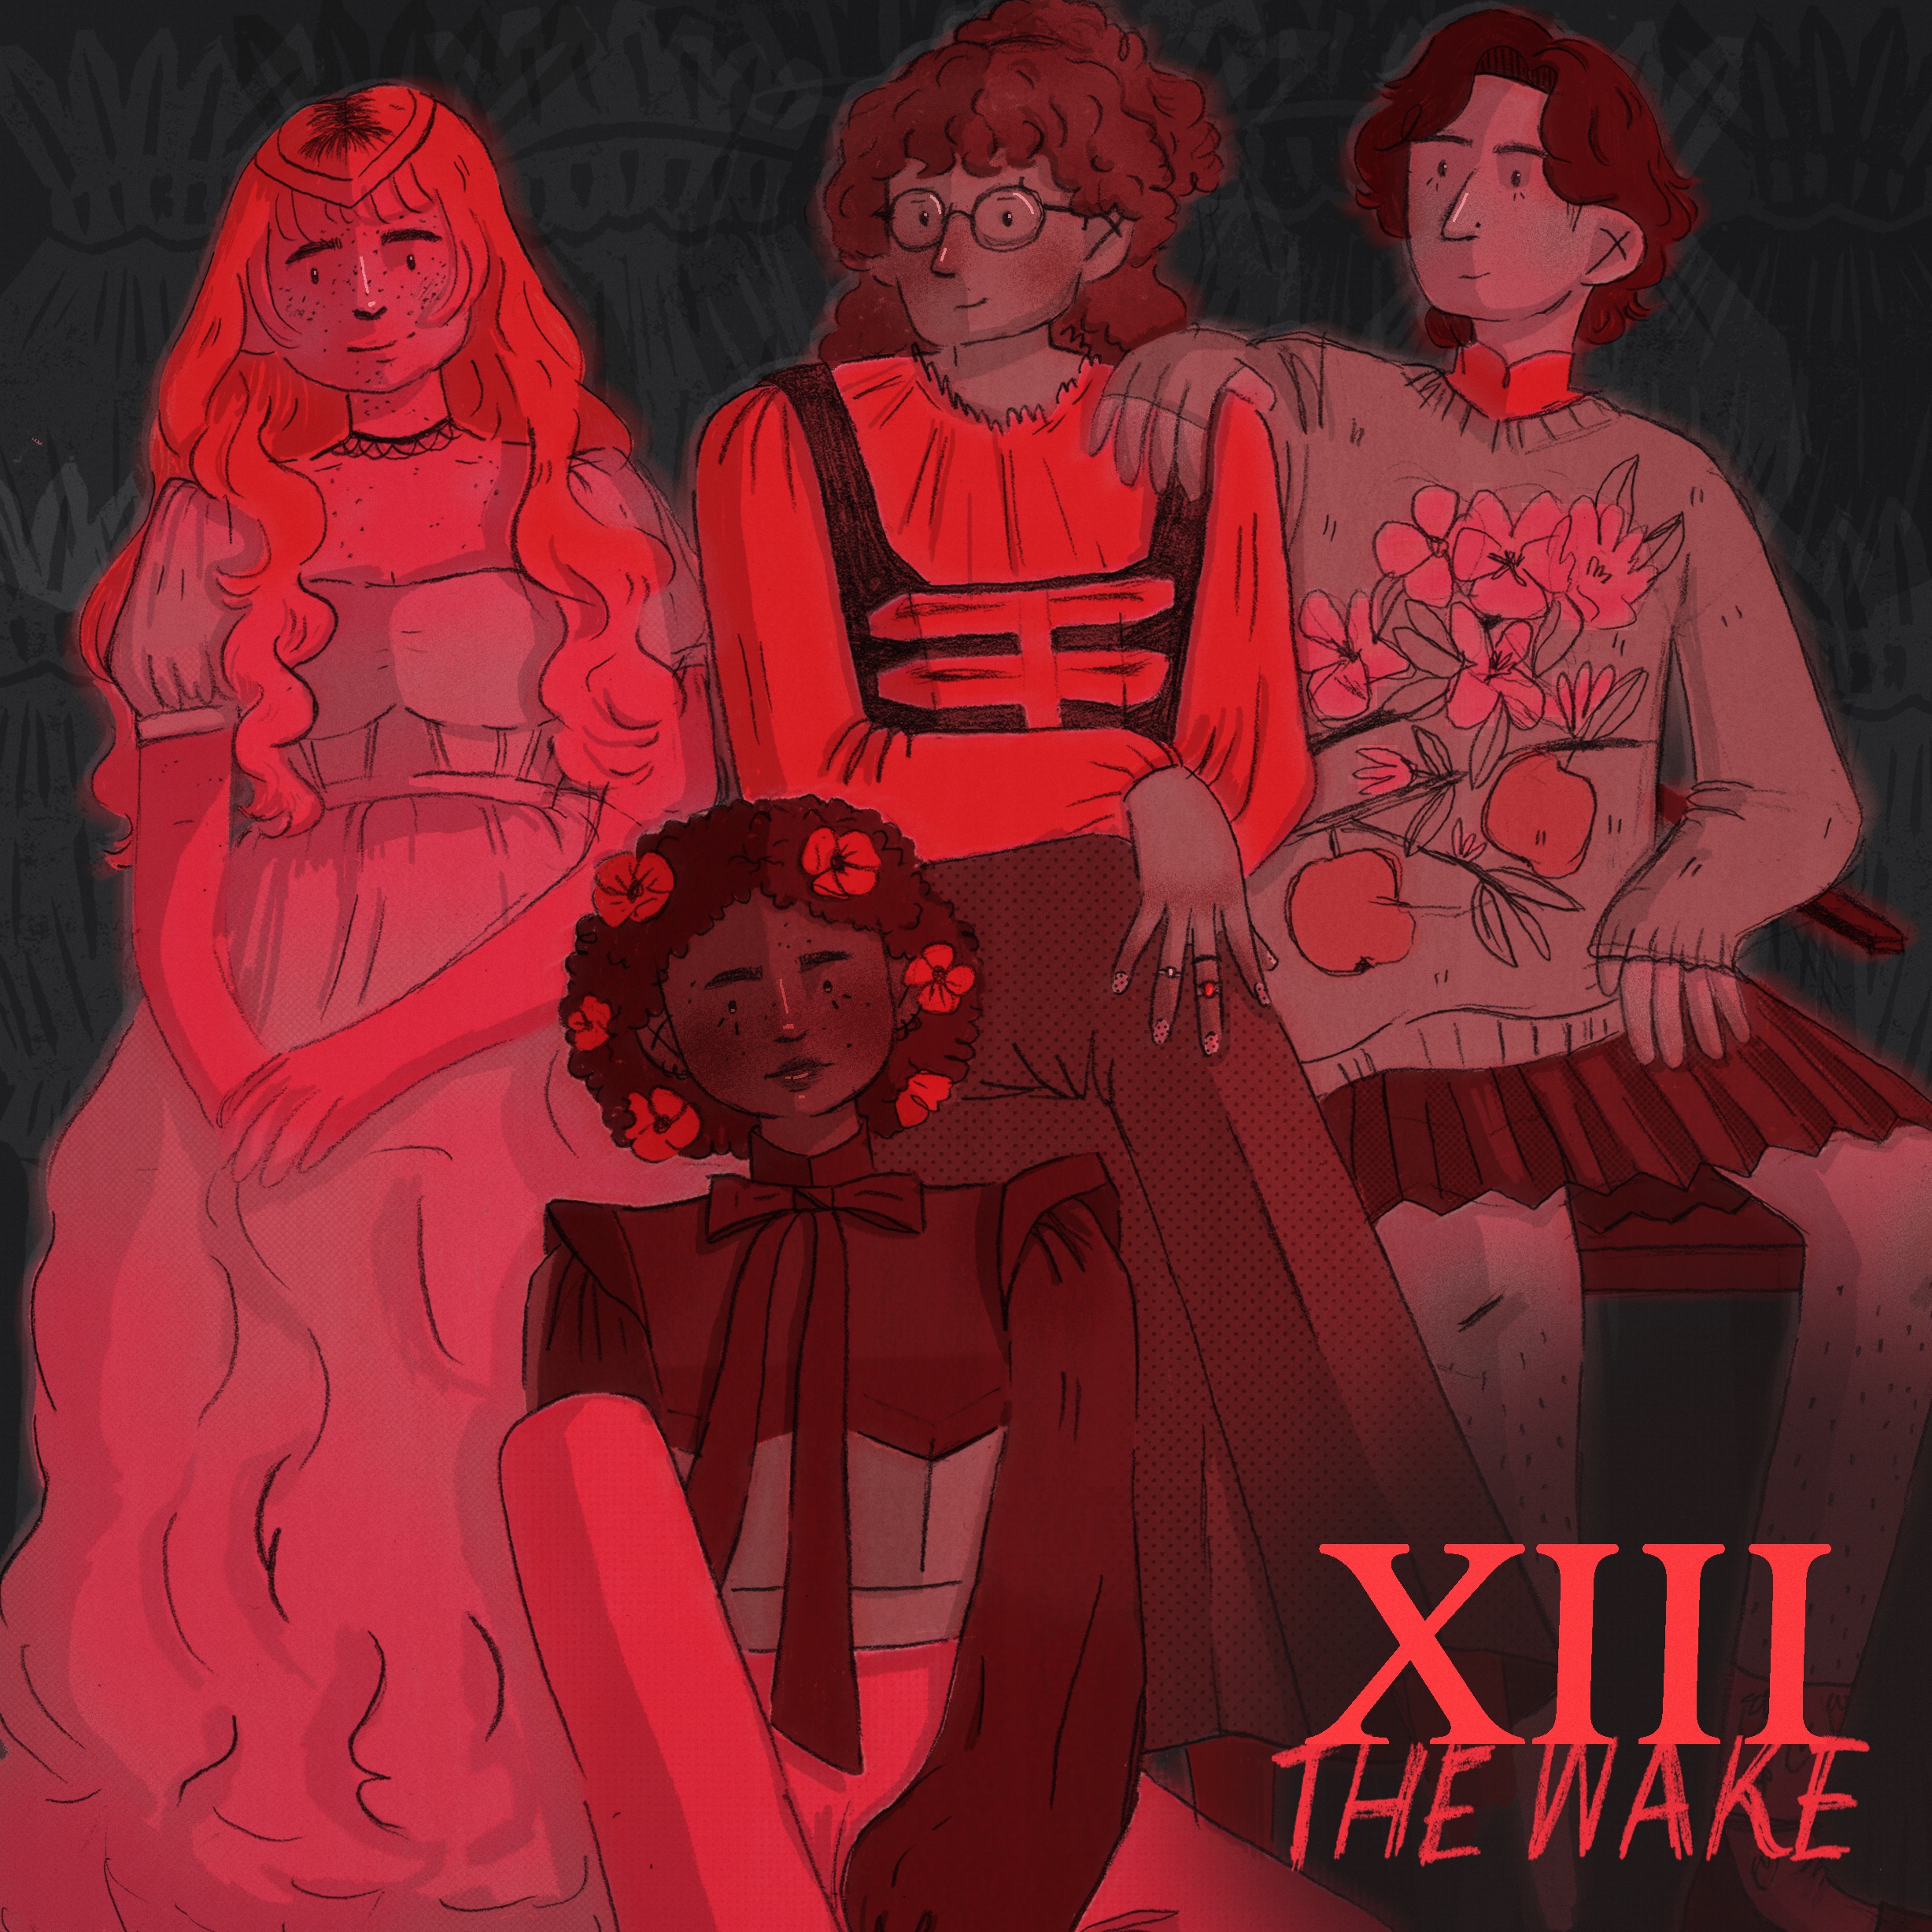 BA Illustration work: an album cover design depicting 4 illustrated characters wearing fancy clothes. The image is red and black toned. Image on the text reads 'XIII' and 'The Wake'.